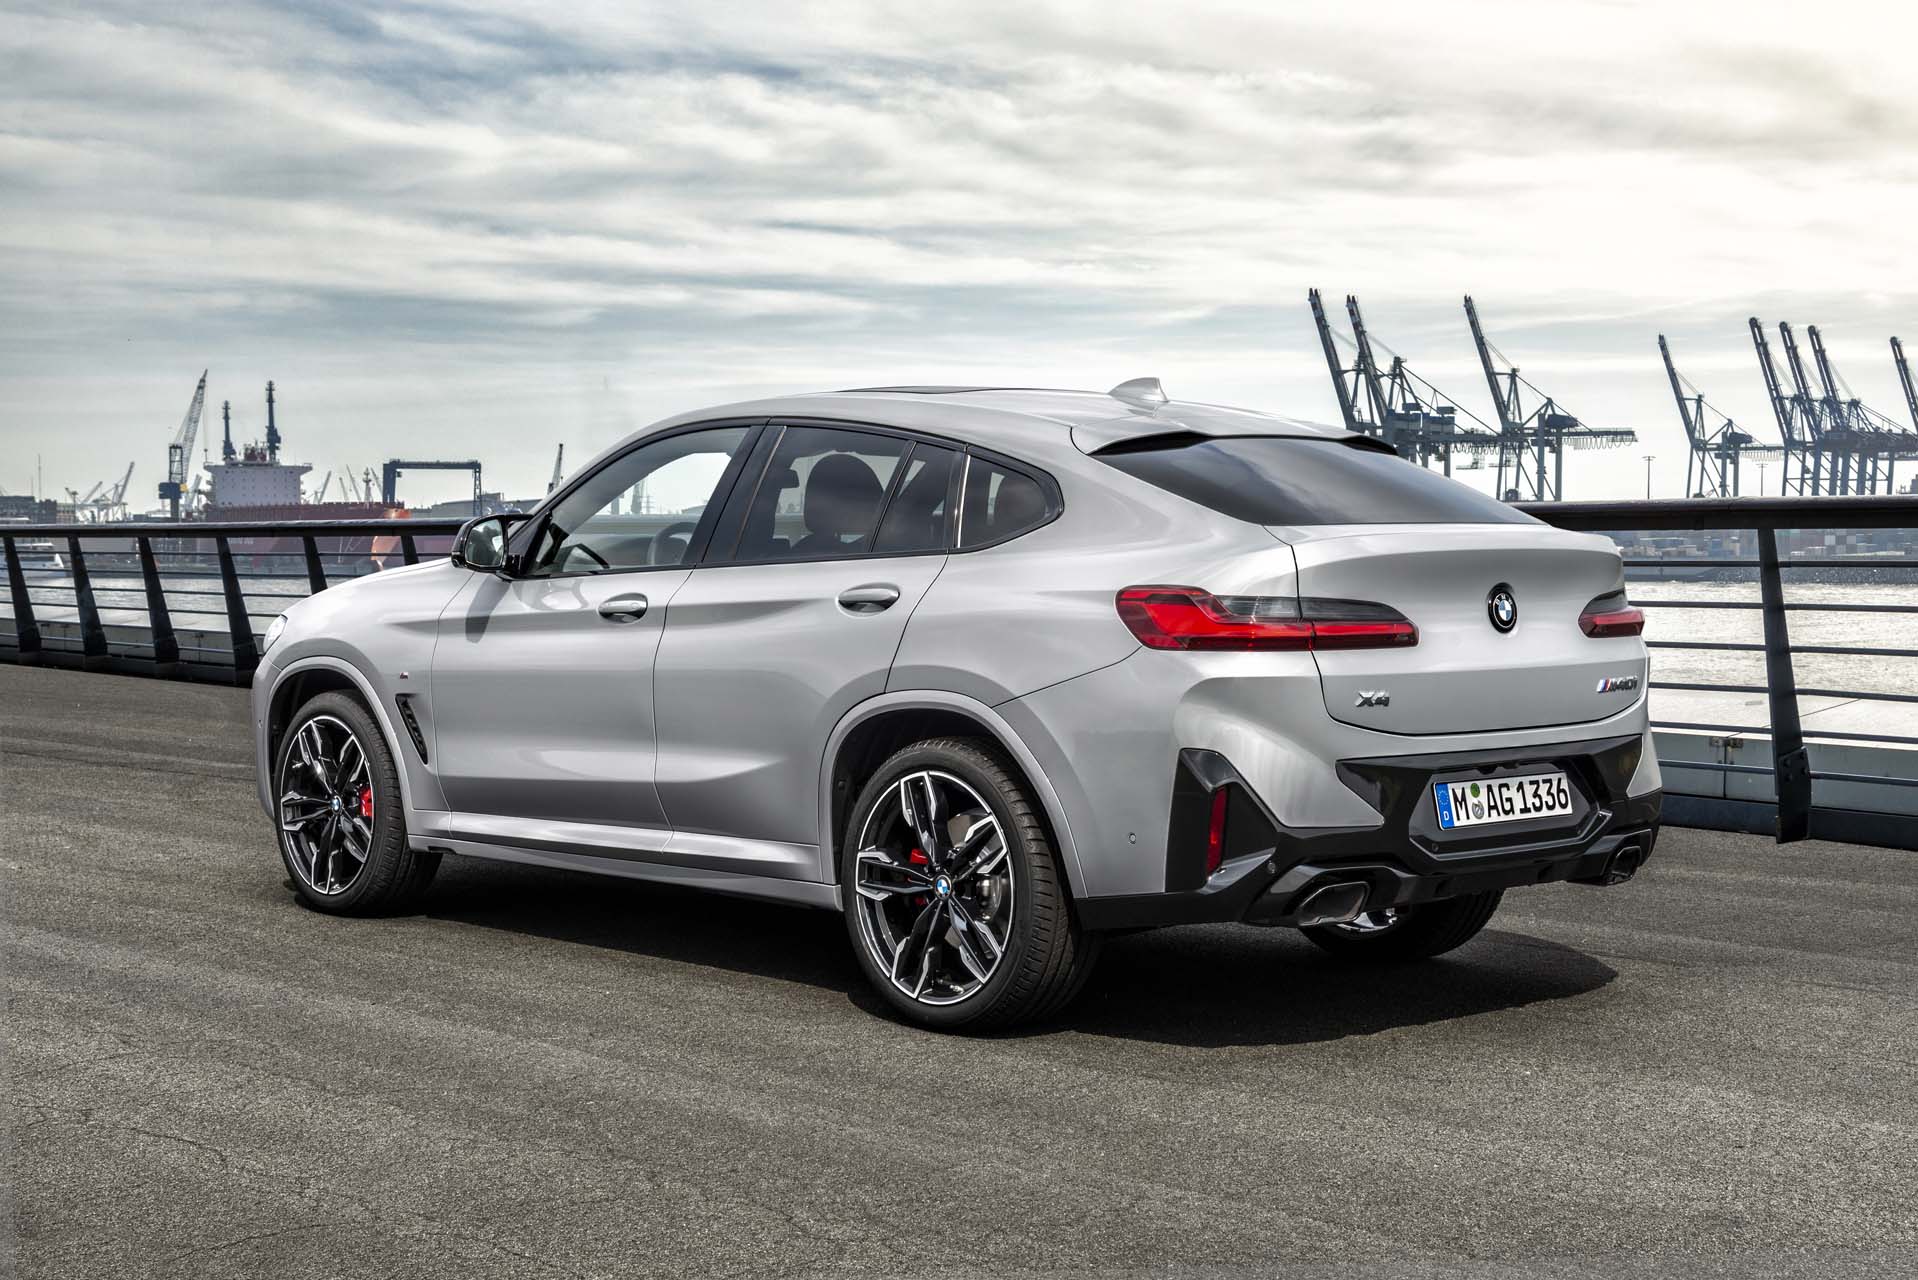 Preview: 2022 BMW X4 keeps sexy looks, adds tech